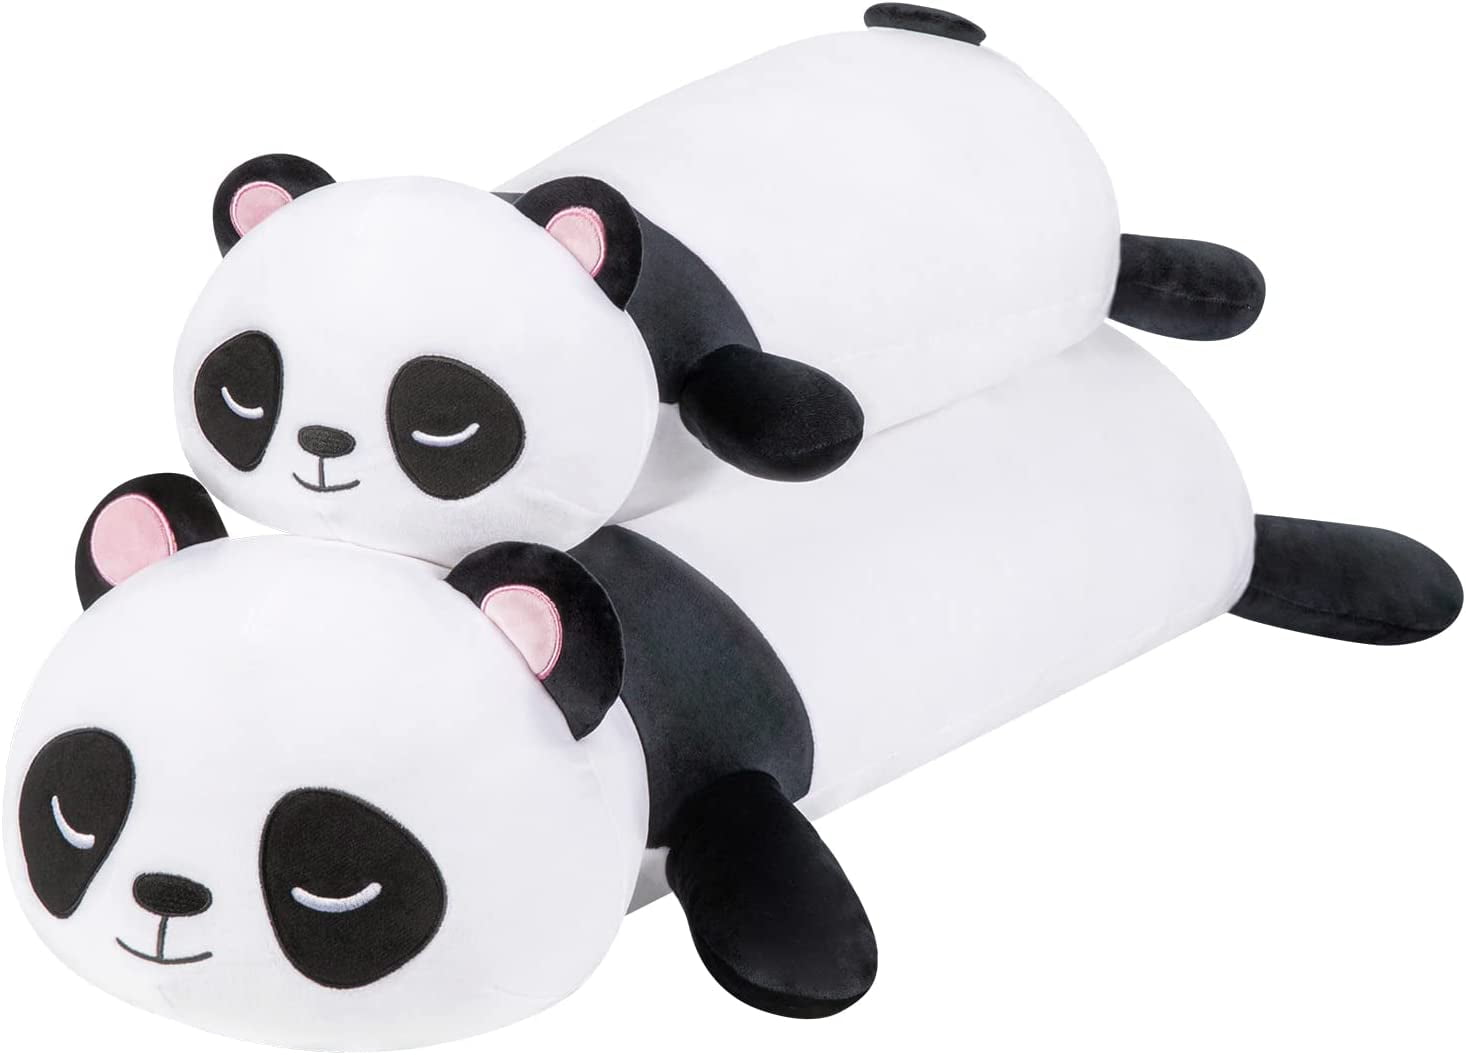 Tembe 23.6 inch Cute Large Panda Plush Stuffed Animal Pillow, Very Soft Squish Mellow Hugging Toy Gifts for Bedding, Kids Sleeping Cute Pillow